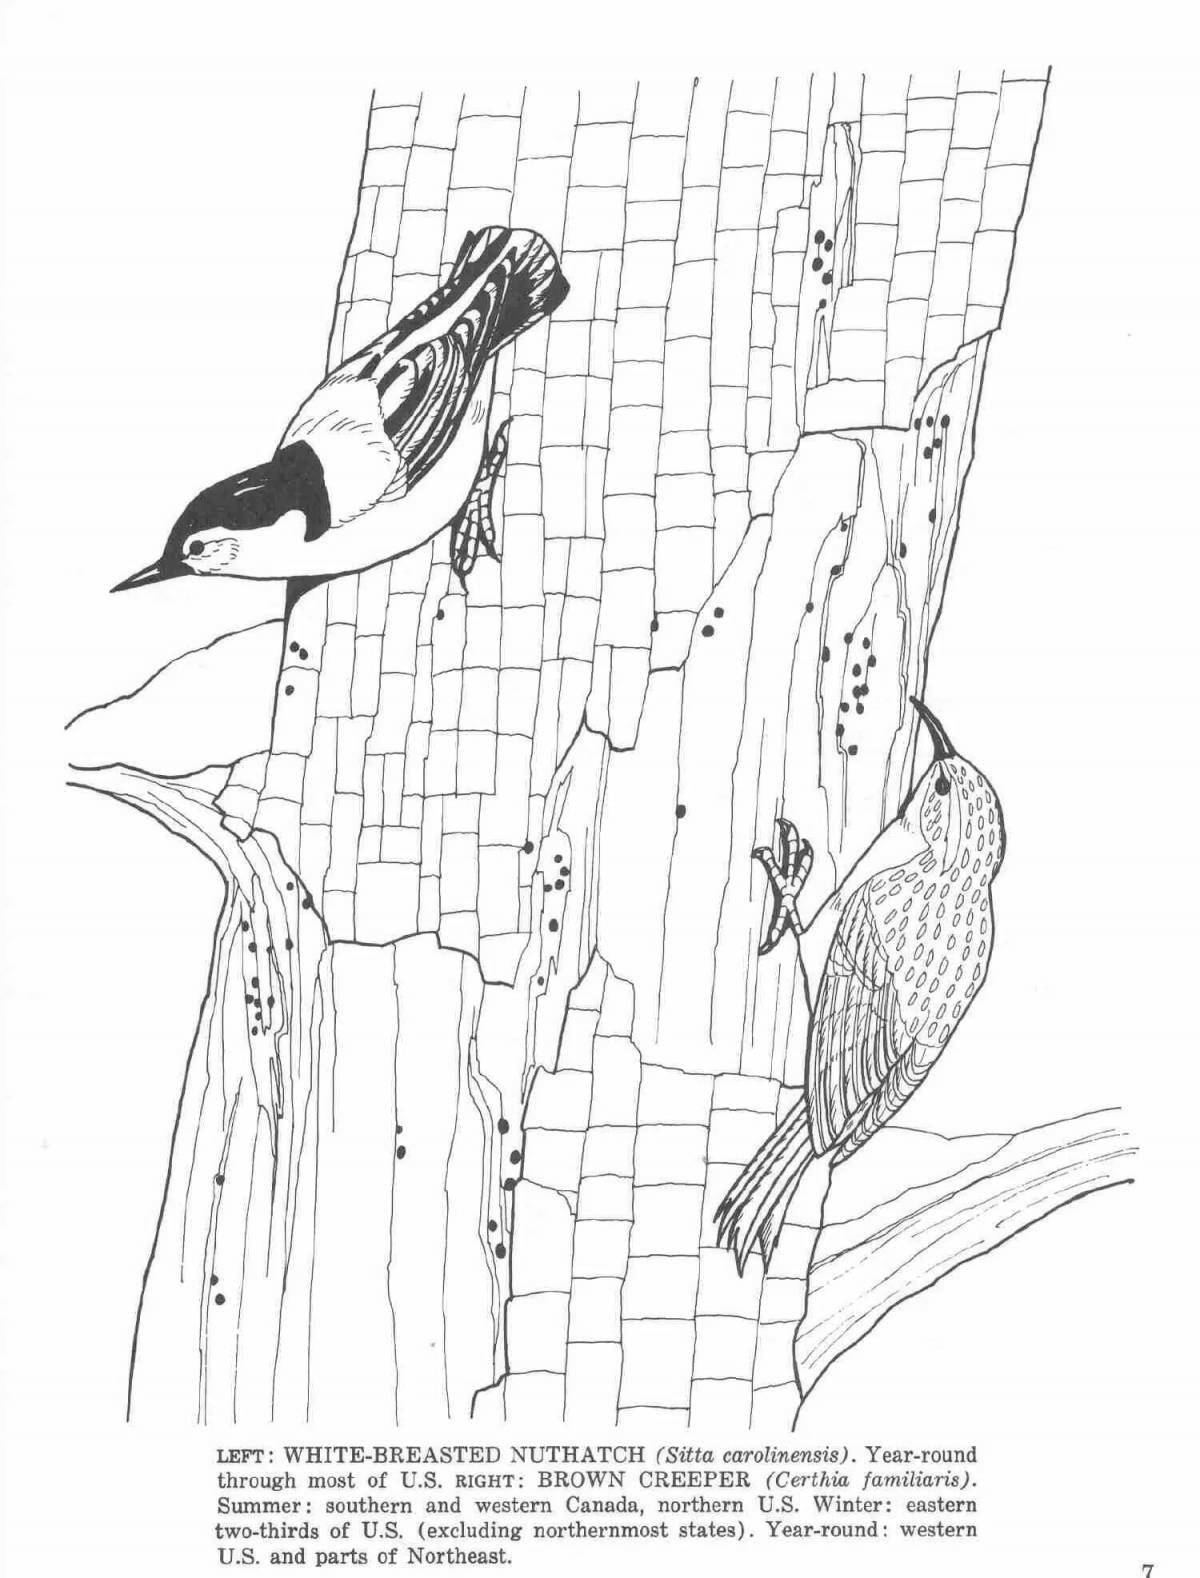 Coloring nuthatch for the little ones